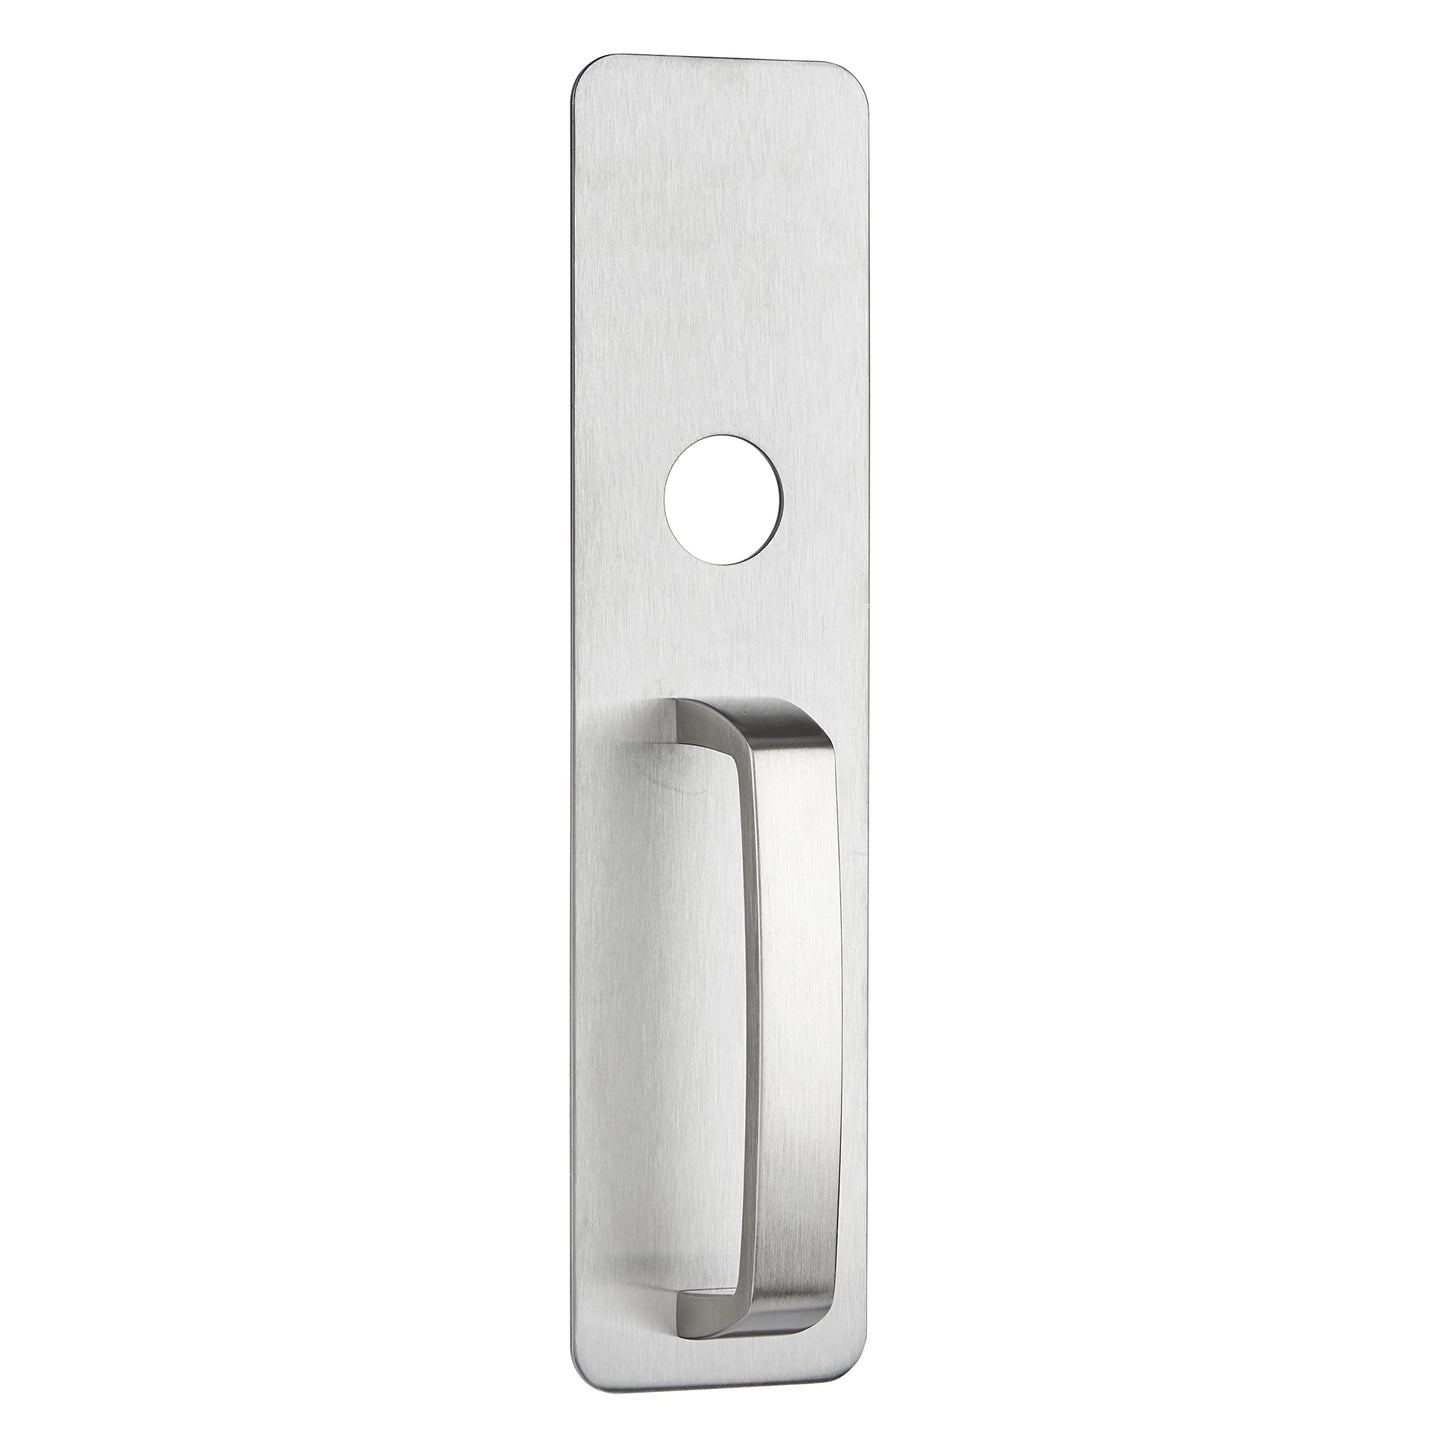 BRINKS Commercial - Commercial Door Pull Plate with Cylinder Hole, Satin Chrome Finish - Meets ANSI Grade 1 Standards, is UL Listed, and is ADA Compliant